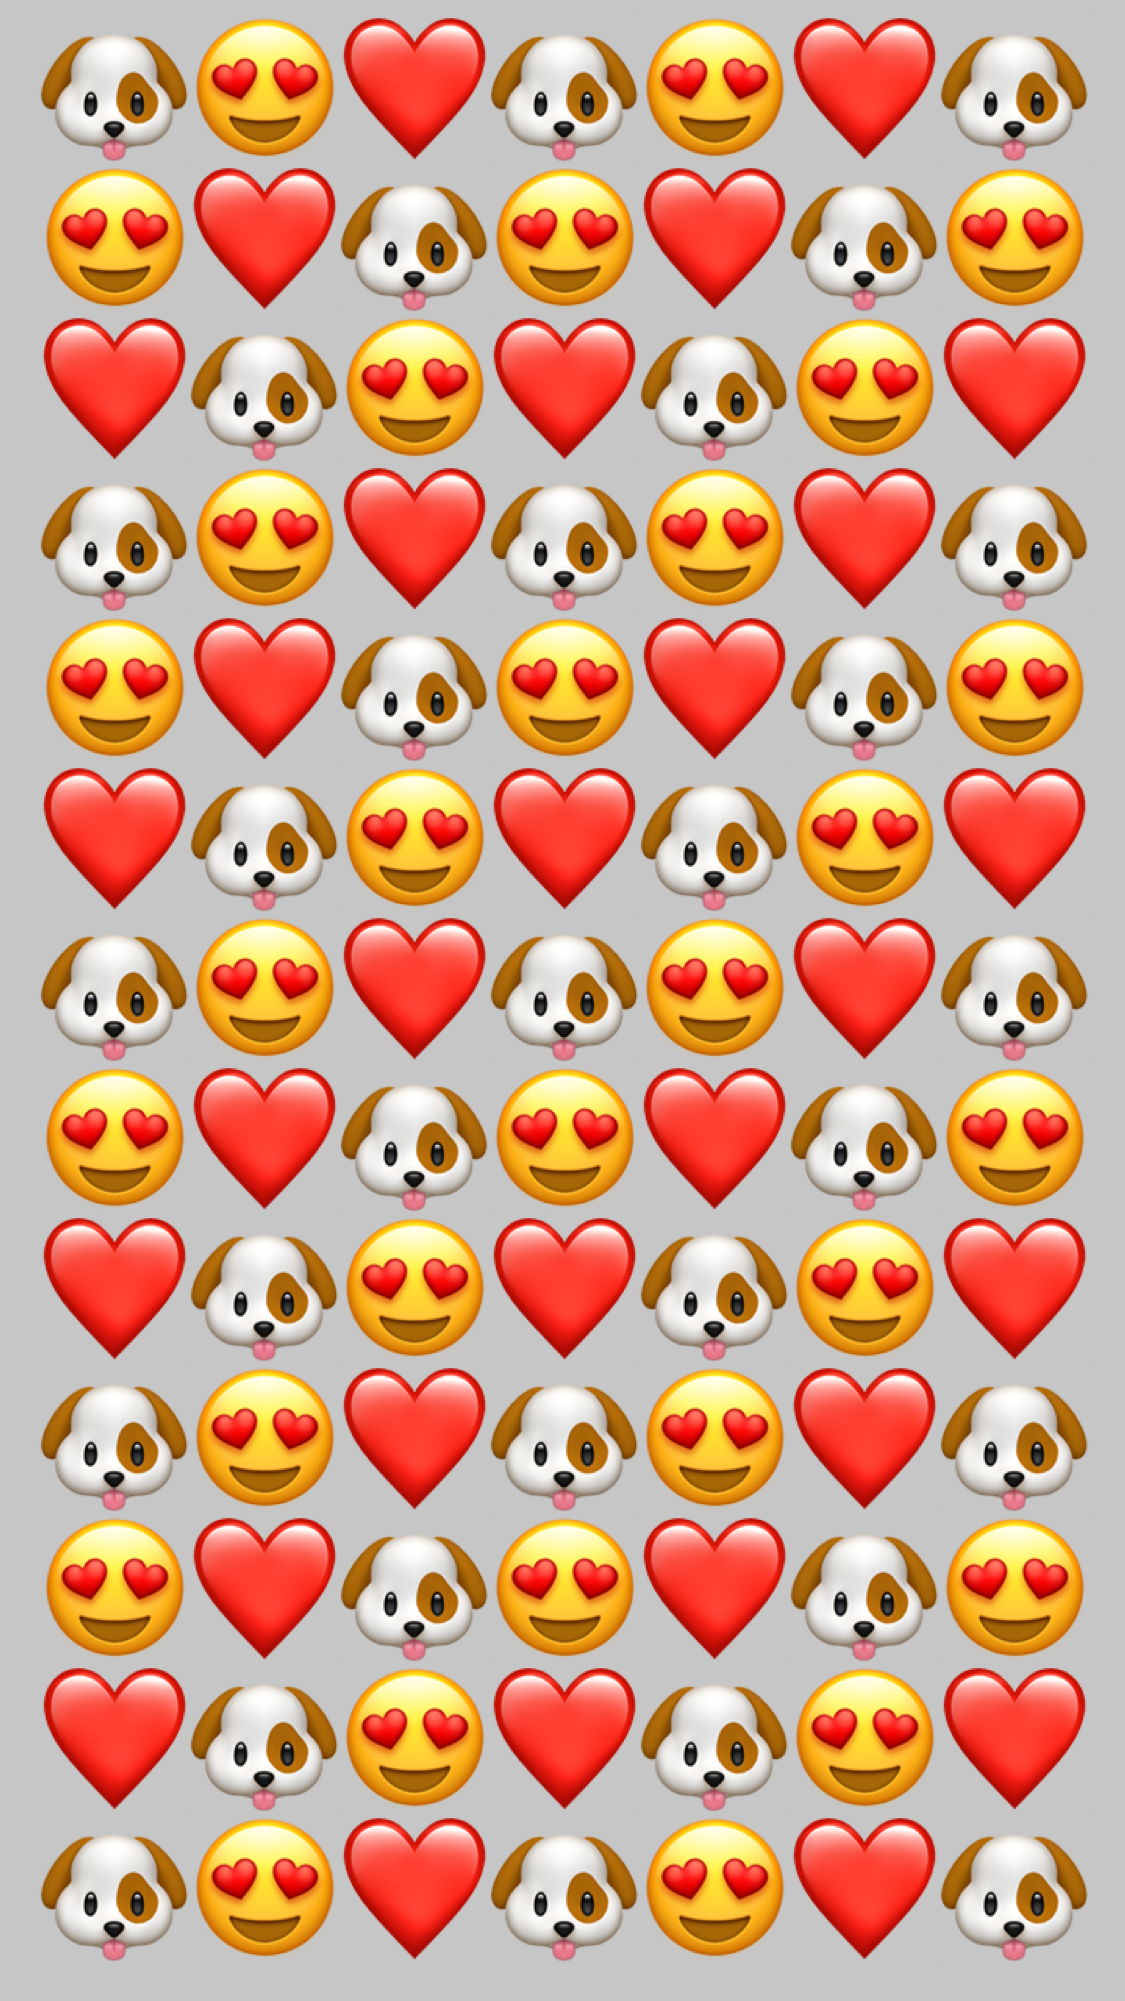 Cute Love Emoji Wallpaper / :・ﾟ✧ copy and paste them into your website or tumblr for borders and dividers cute sparkles